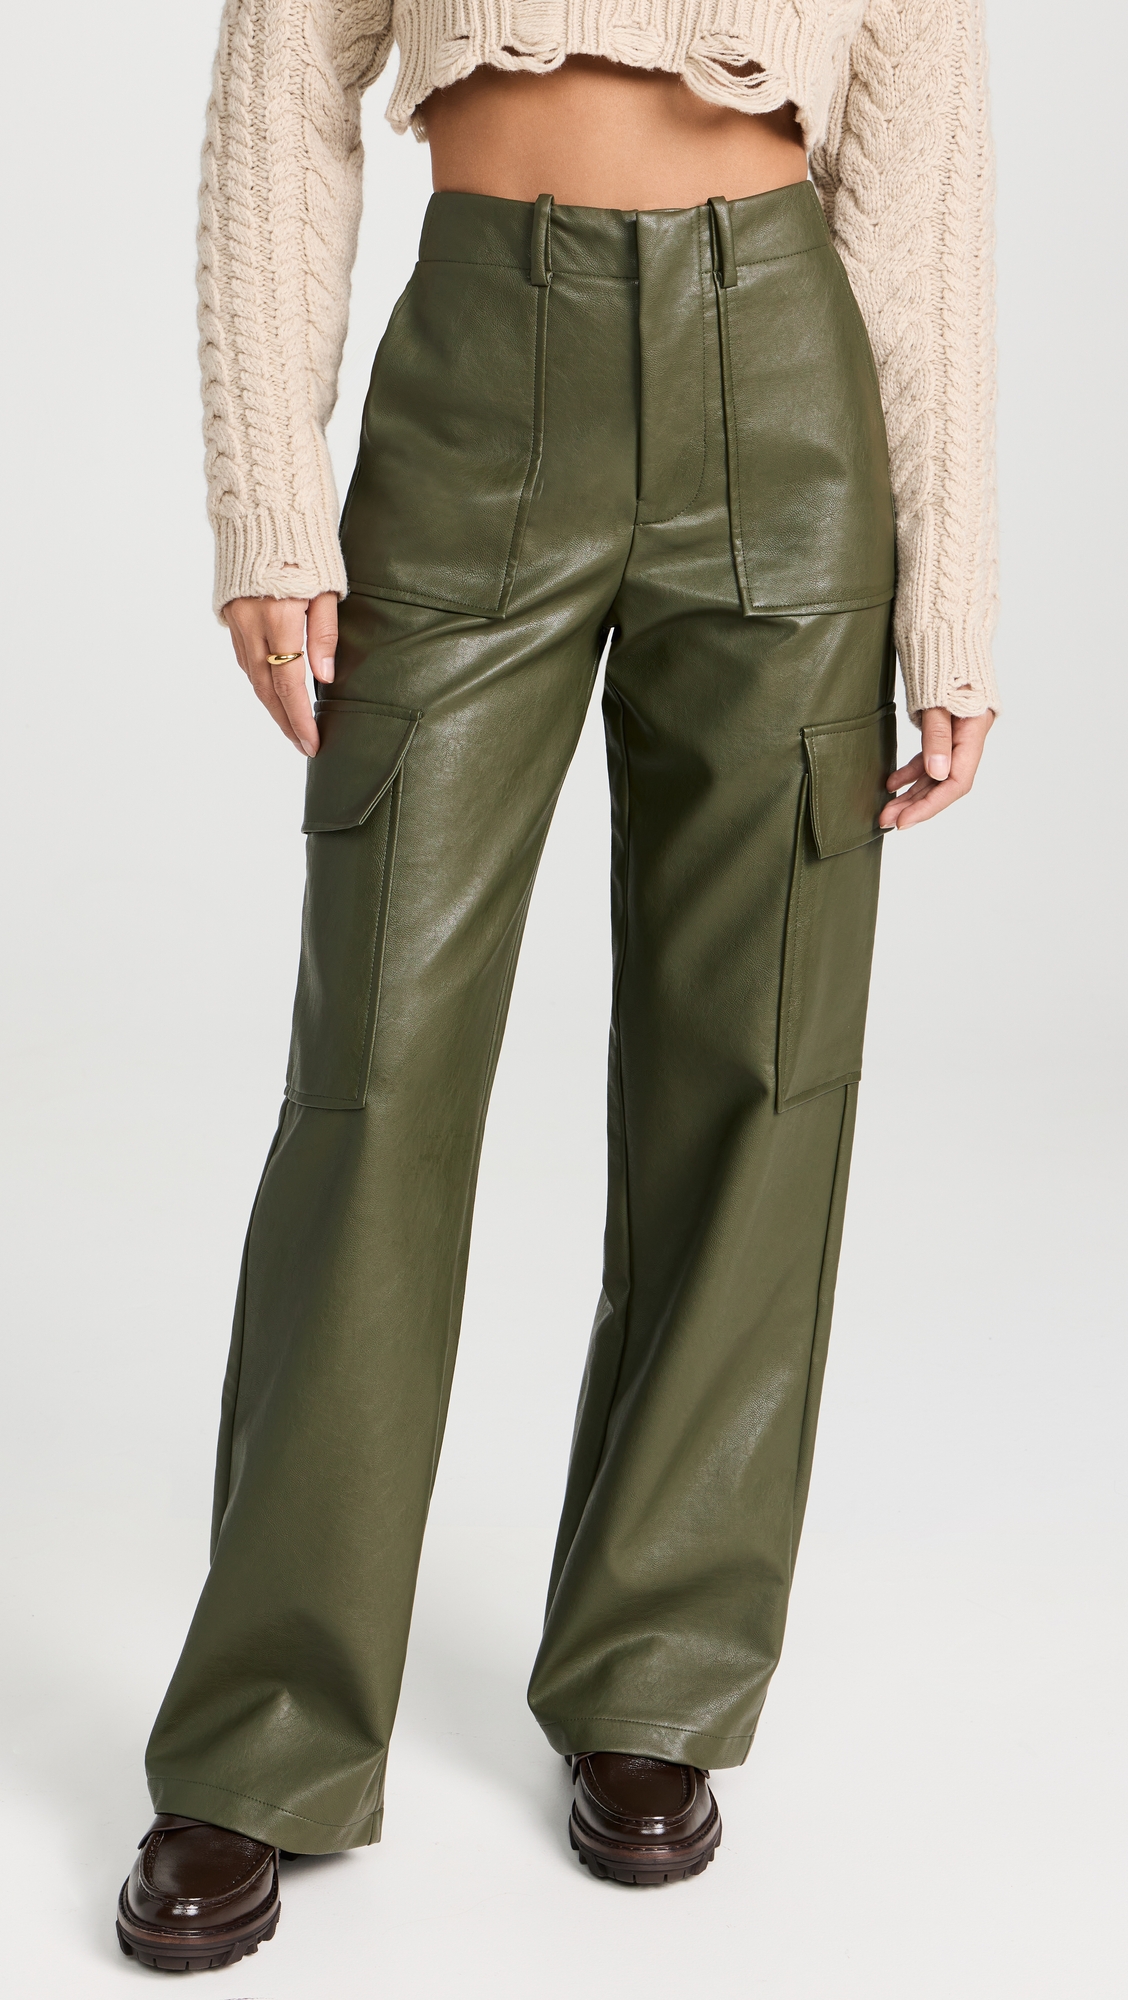 8 Fall Pant Trends That Will Finally Replace Skinny Jeans | Who What Wear